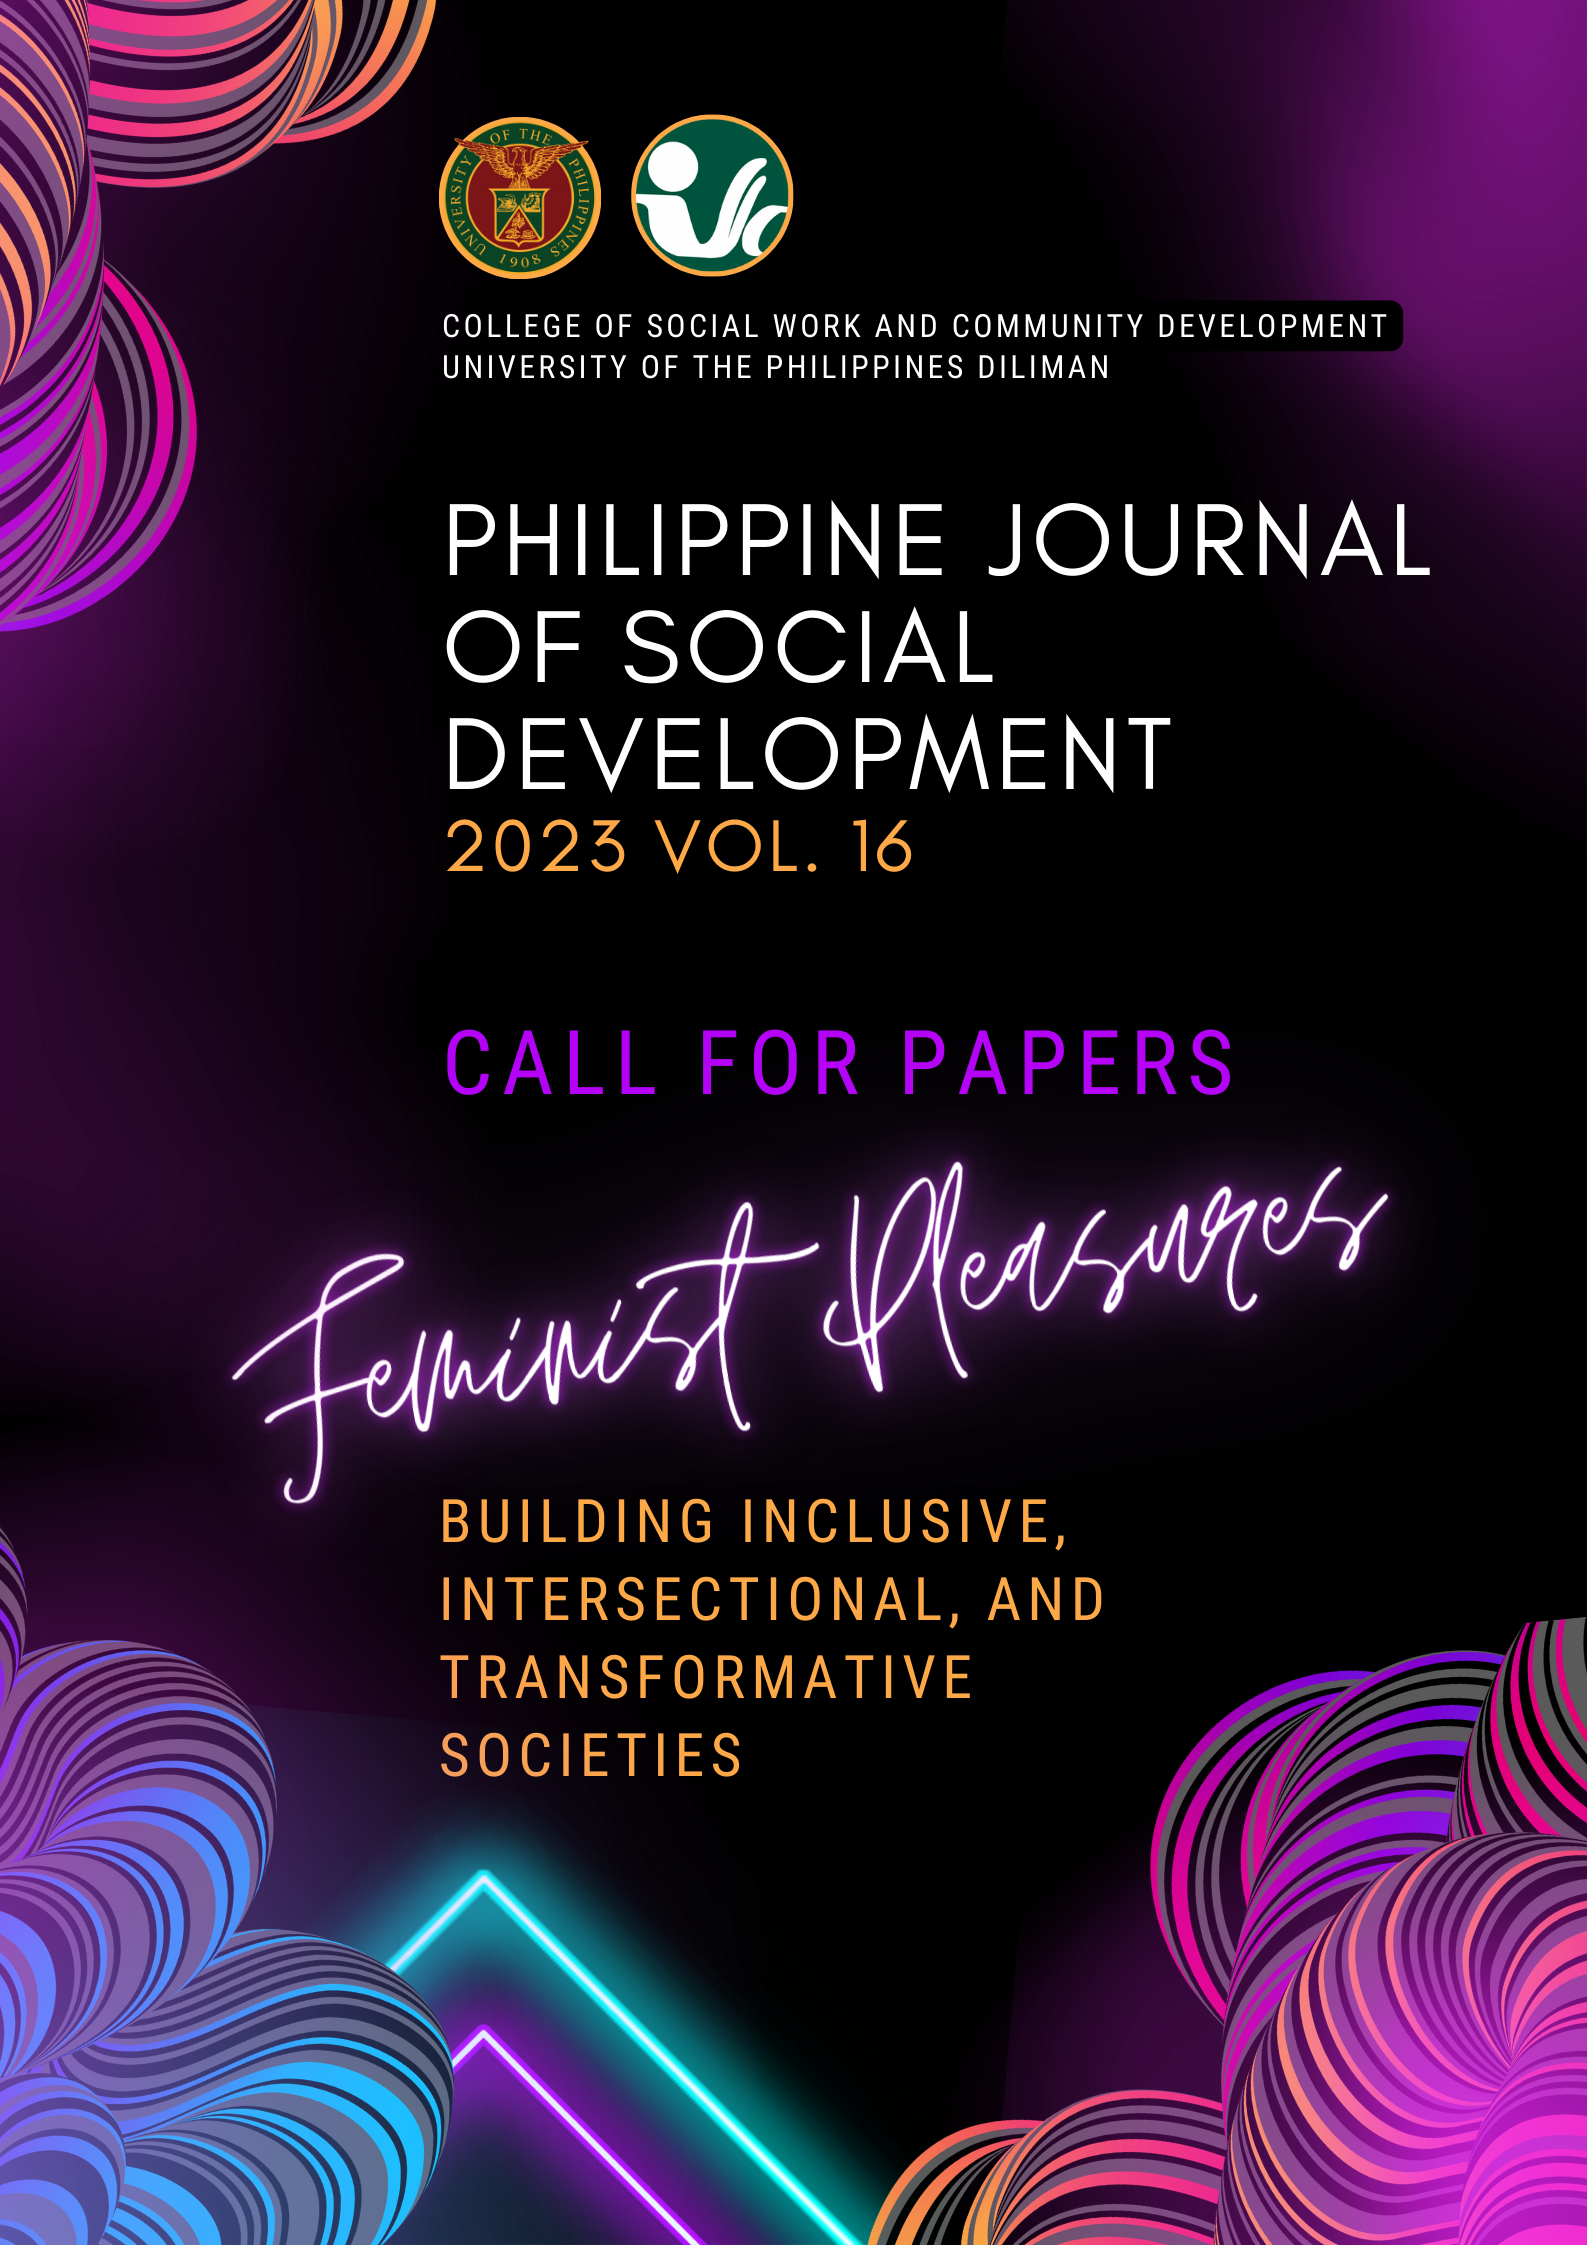 Call for Papers:  Philippine Journal of Social Development 2023 Vol 16 Feminist pleasures: Building inclusive, intersectional, and transformative societies